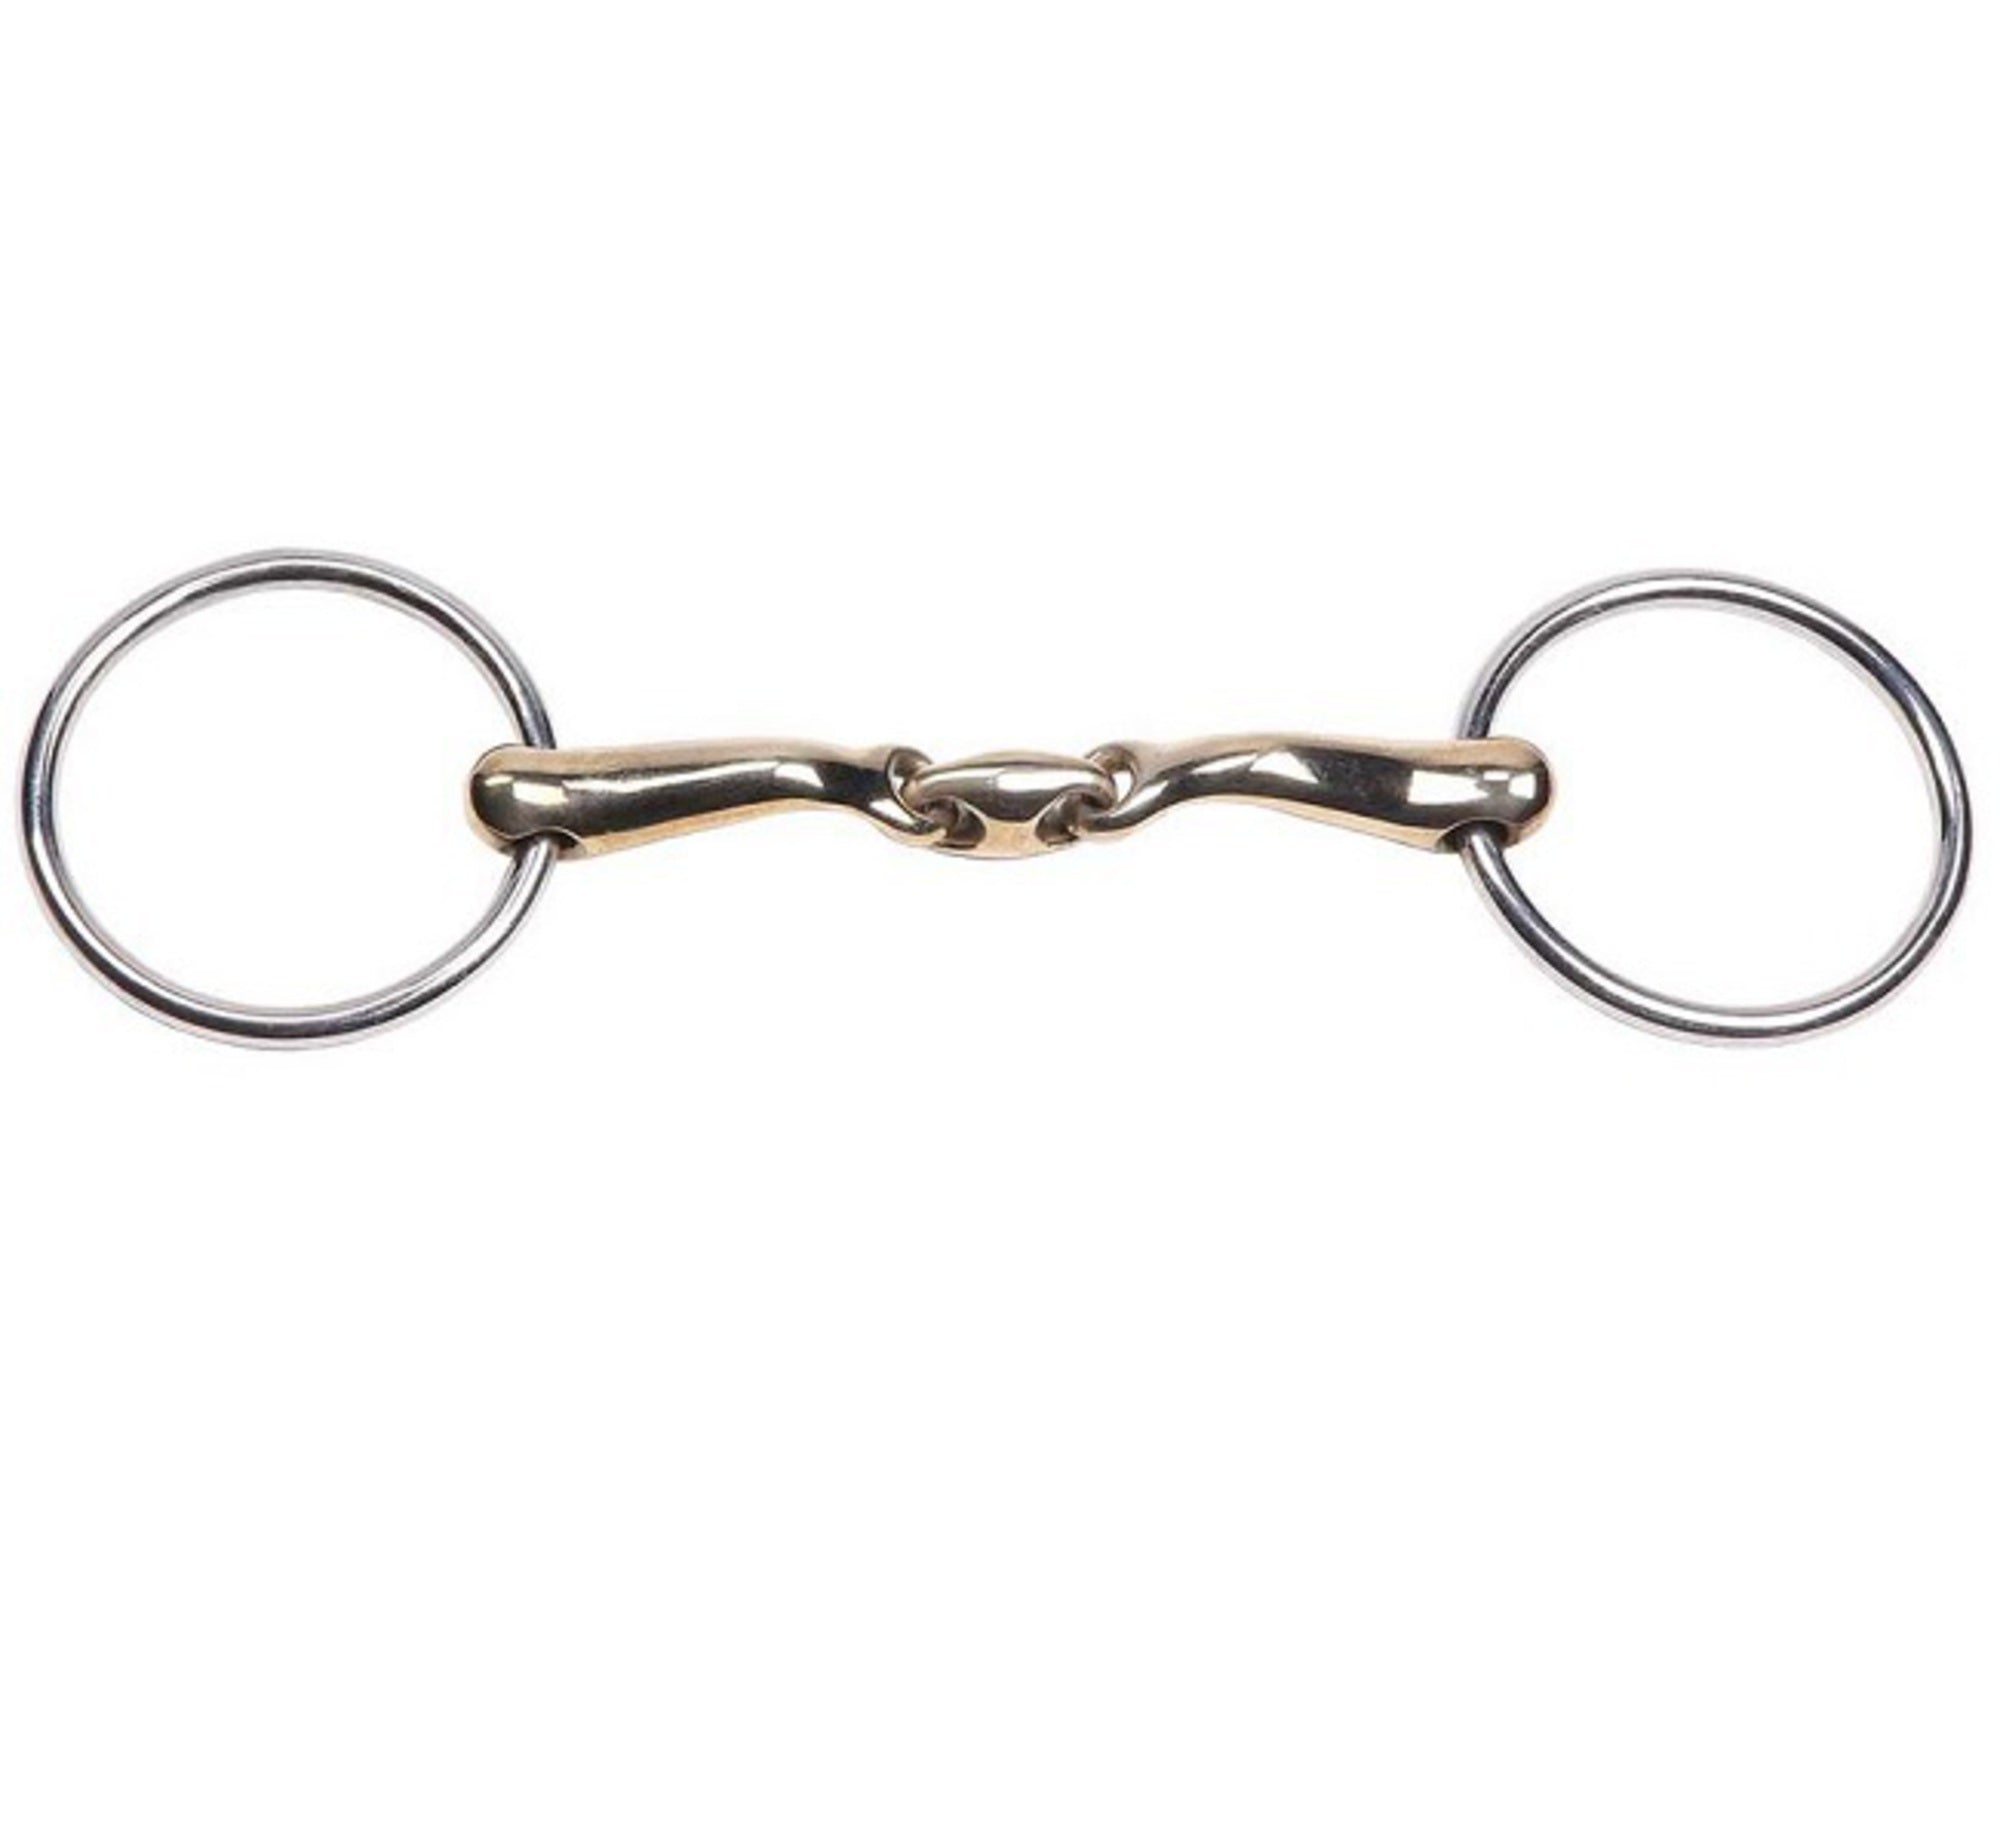 Zilco Curved Gold Training Snaffle